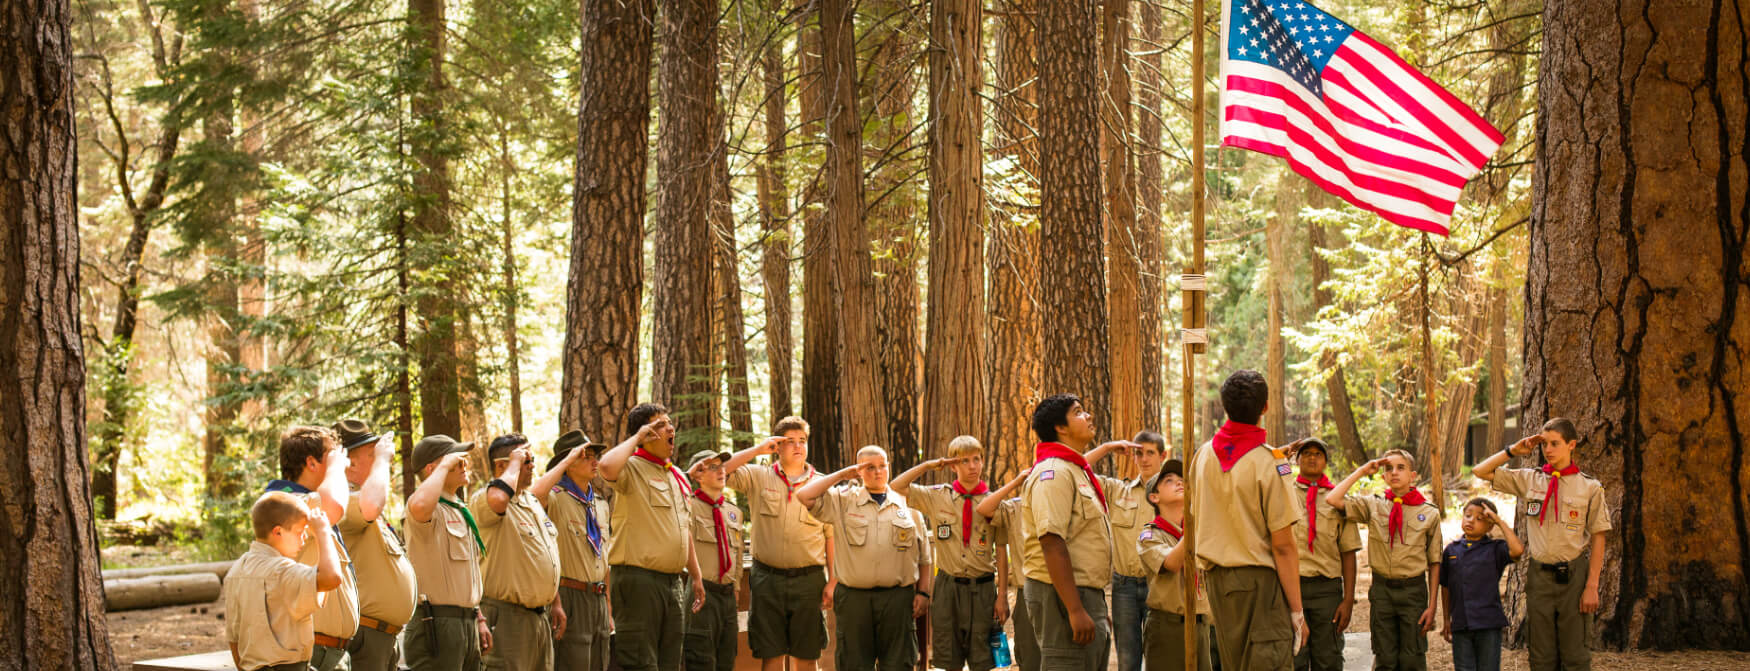 Scouts saluting the flag